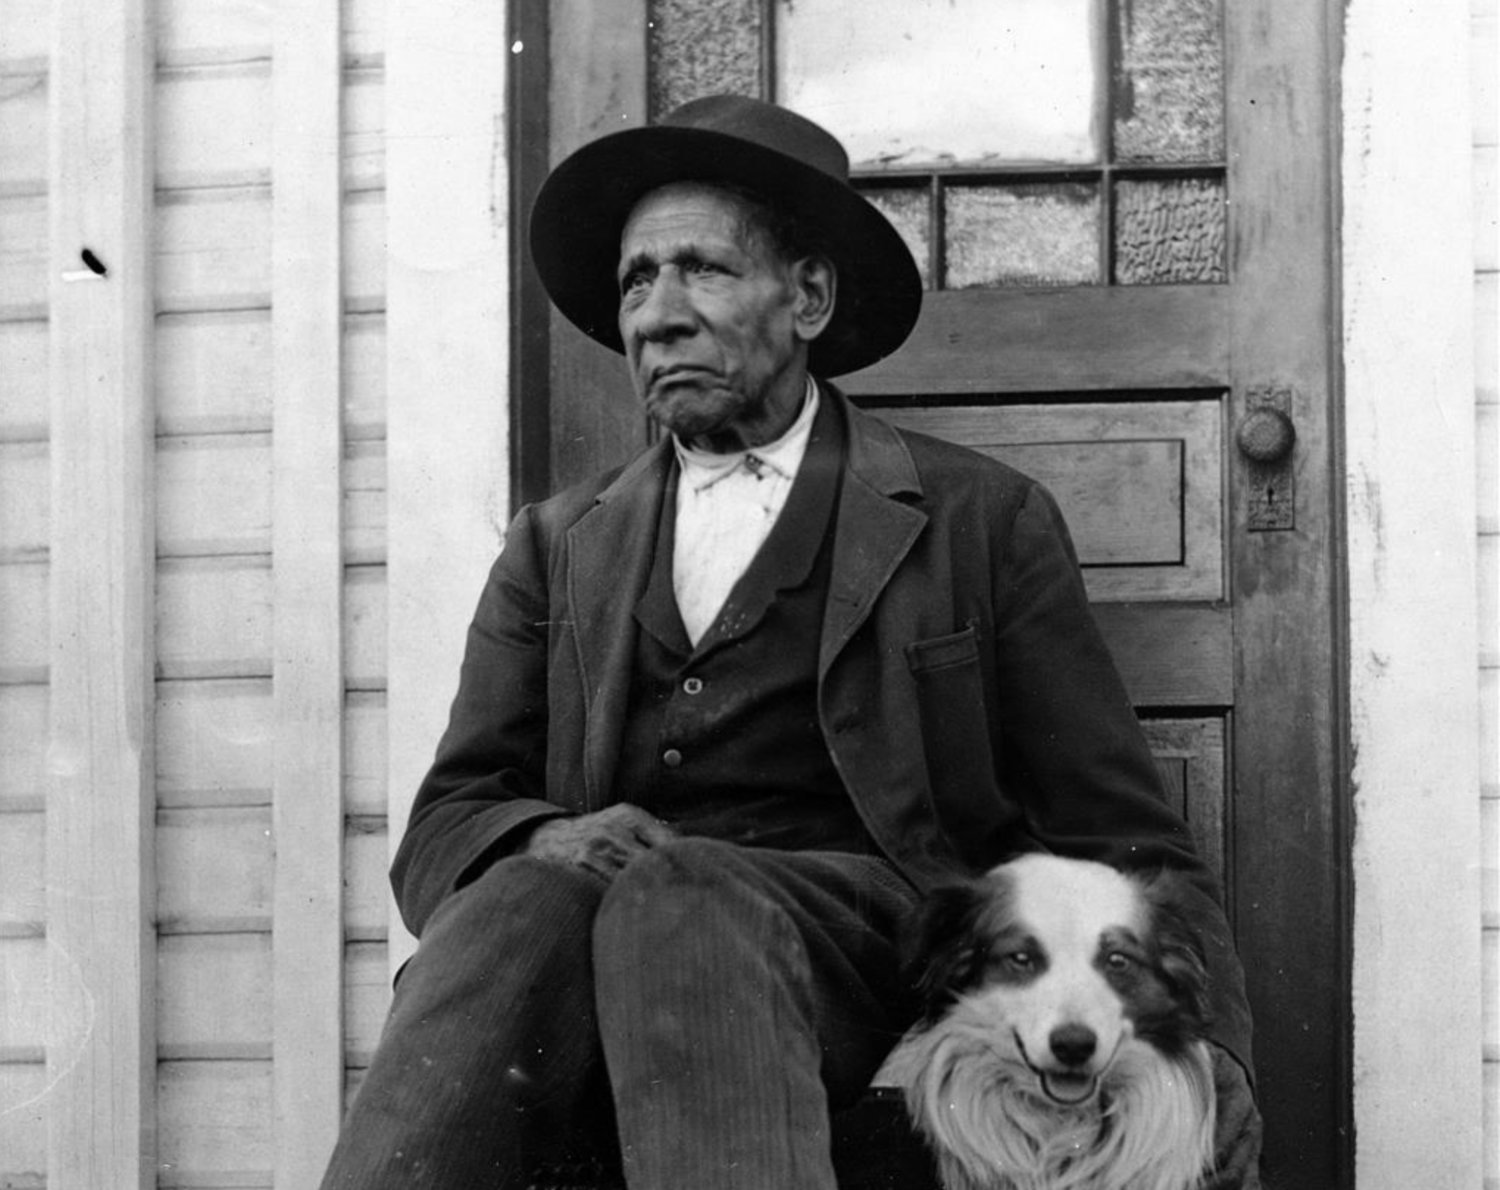 George Washington is pictured with his dog on a porch in this photograph from the Washington State Historical Society.